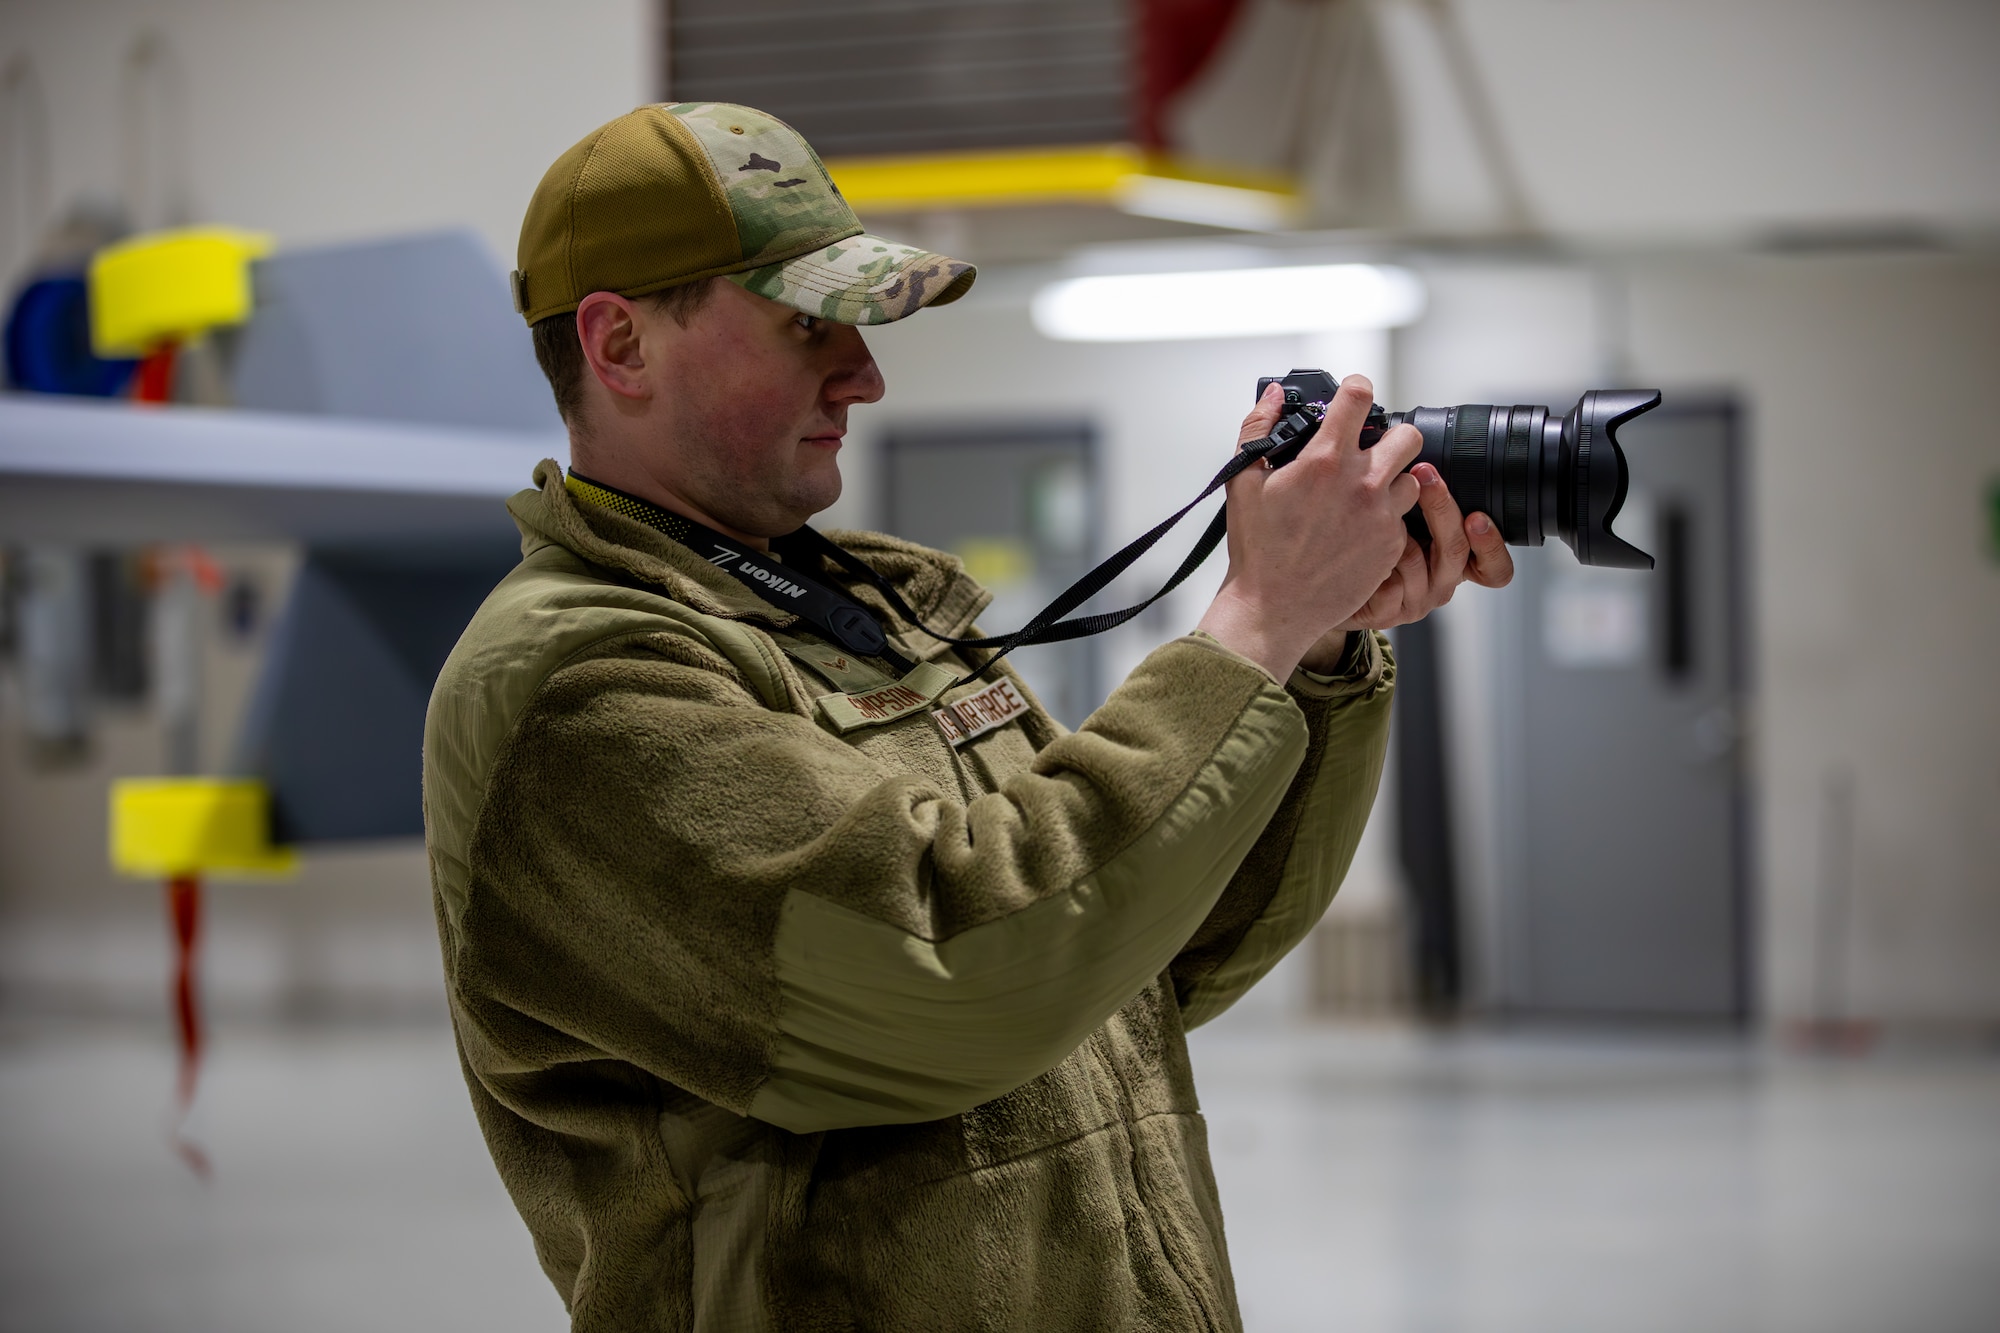 Airman 1st Class Colin Simpson, a public affairs specialist assigned to the 178th Communications Flight, takes a photograph following the landing of a remotely piloted MQ-9 Reaper from the 163rd Attack Wing at the 178th Wing on Springfield-Beckley Air National Guard Base, Ohio, March 12, 2024. Exercise Advanced Wrath gives the 178th Wing an opportunity to support an MQ-9 Reaper locally with airmen from across the country. (U.S. Army National Guard photo by Staff Sgt. Thomas Moeger)